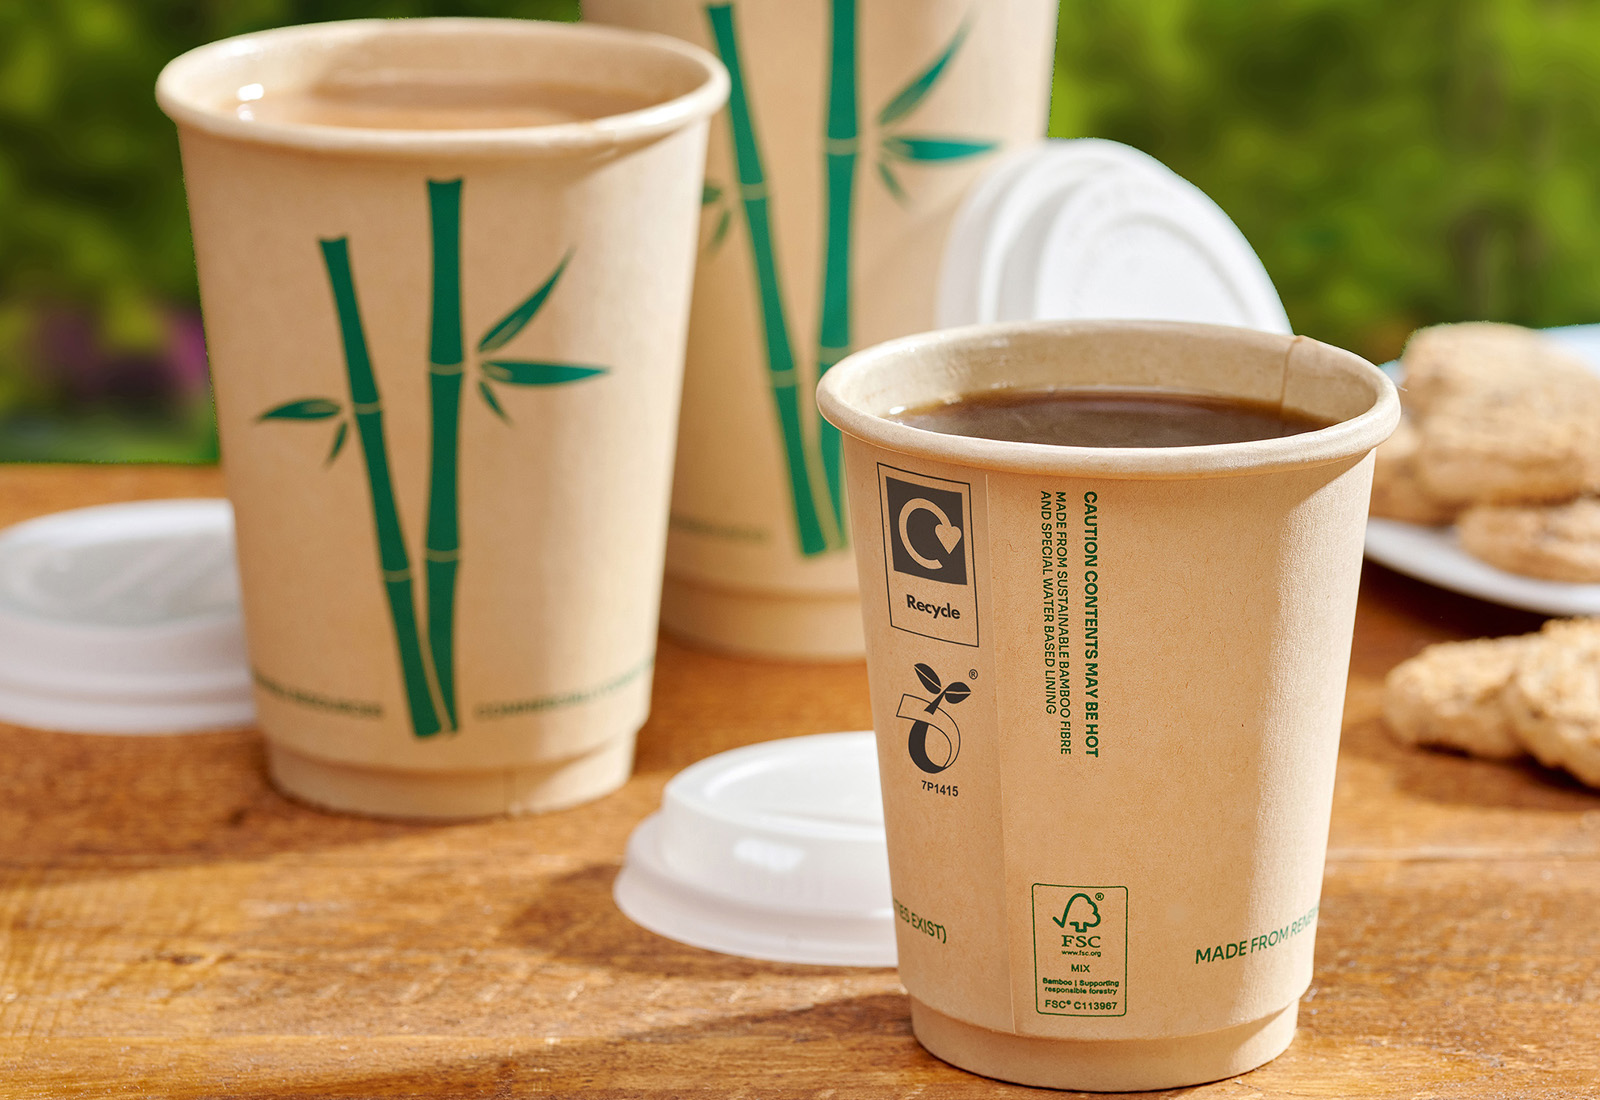 Celebration Packaging's bamboo cups now 100% recyclable